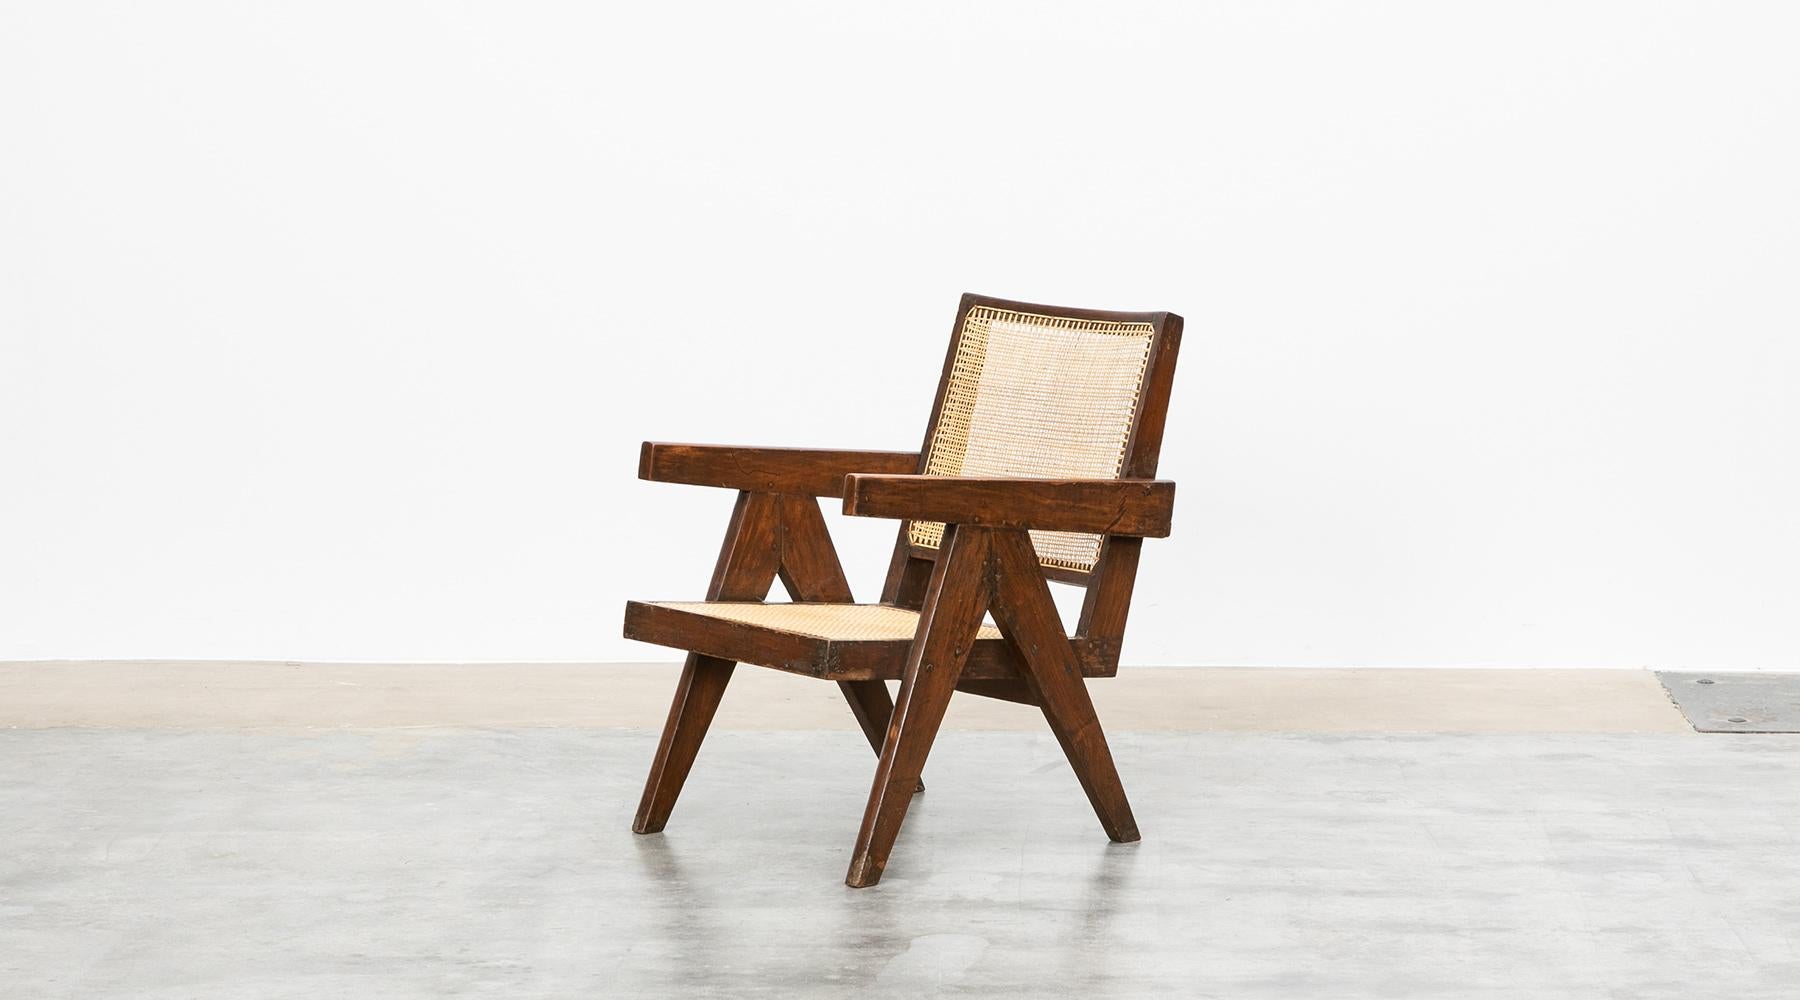 Lounge chair designed by Pierre Jeanneret in teak and cane, Chandigarh, India, 1955.

Single original lounge chair designed by Pierre Jeanneret in teak with woven cane on the seat and curved backrest appears in beautiful patina. The chair has a